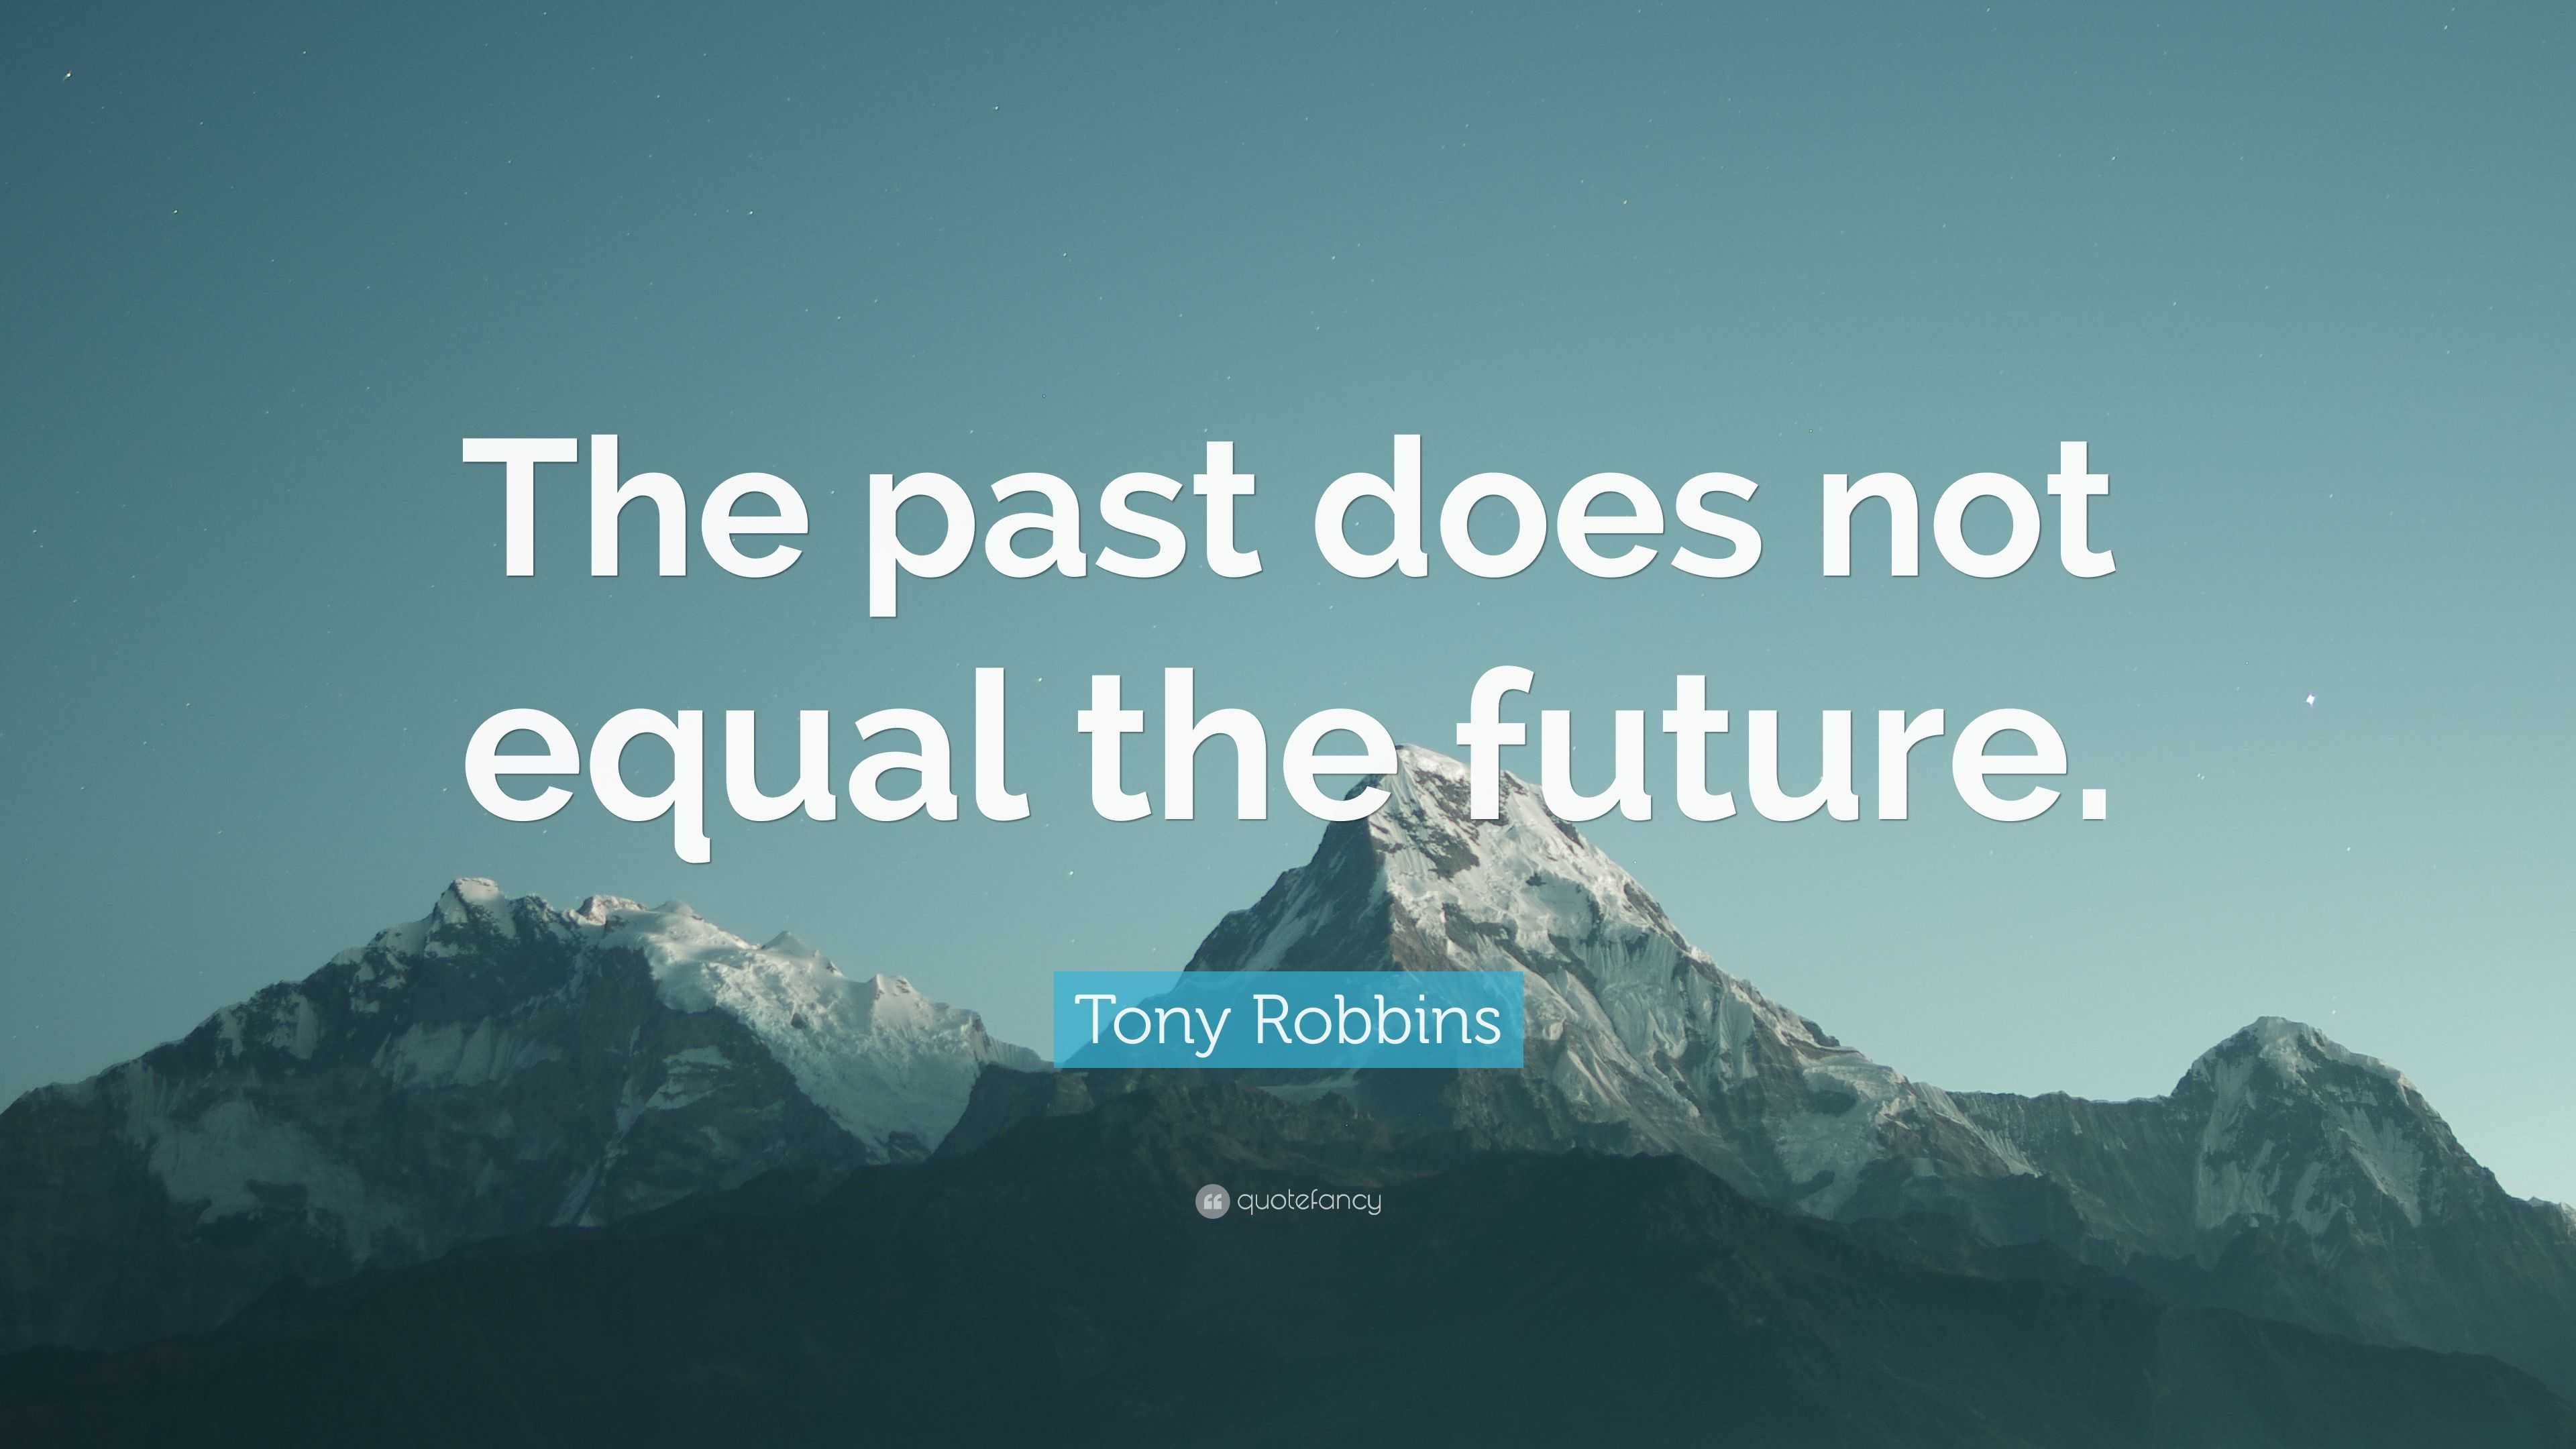 Tony Robbins Quote: “The past does not equal the future.”